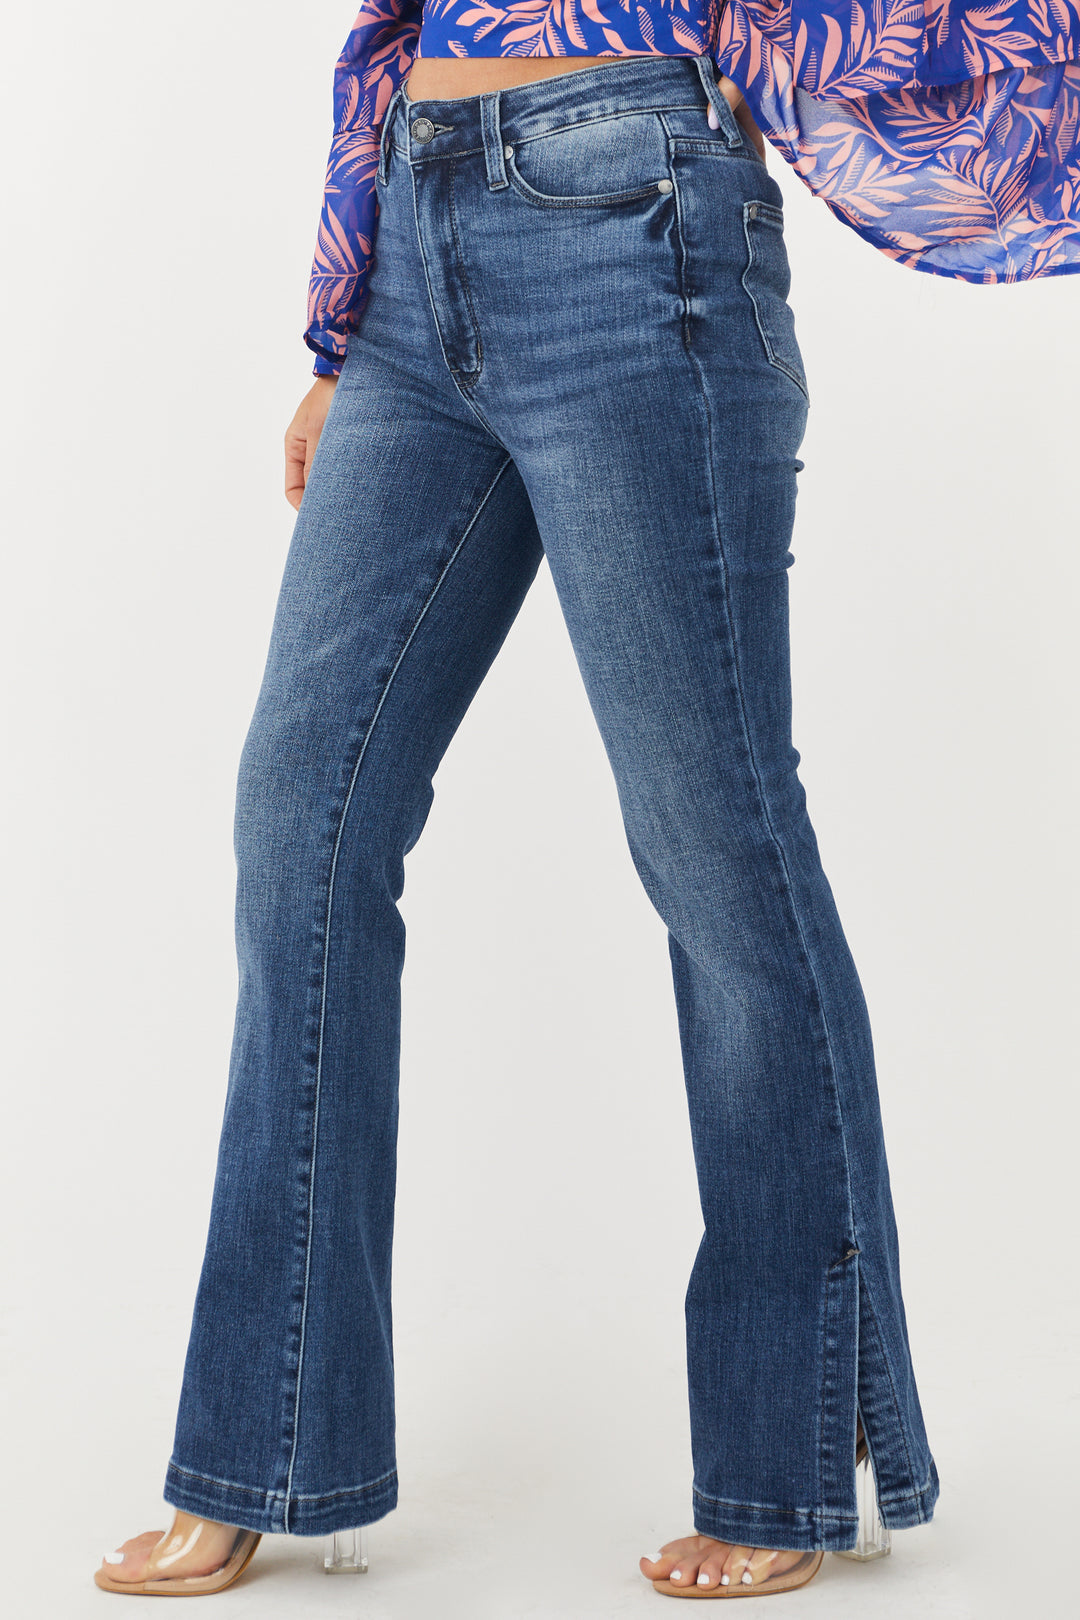 Medium Wash High Rise Bootcut Jeans with Side Slits & Lime Lush